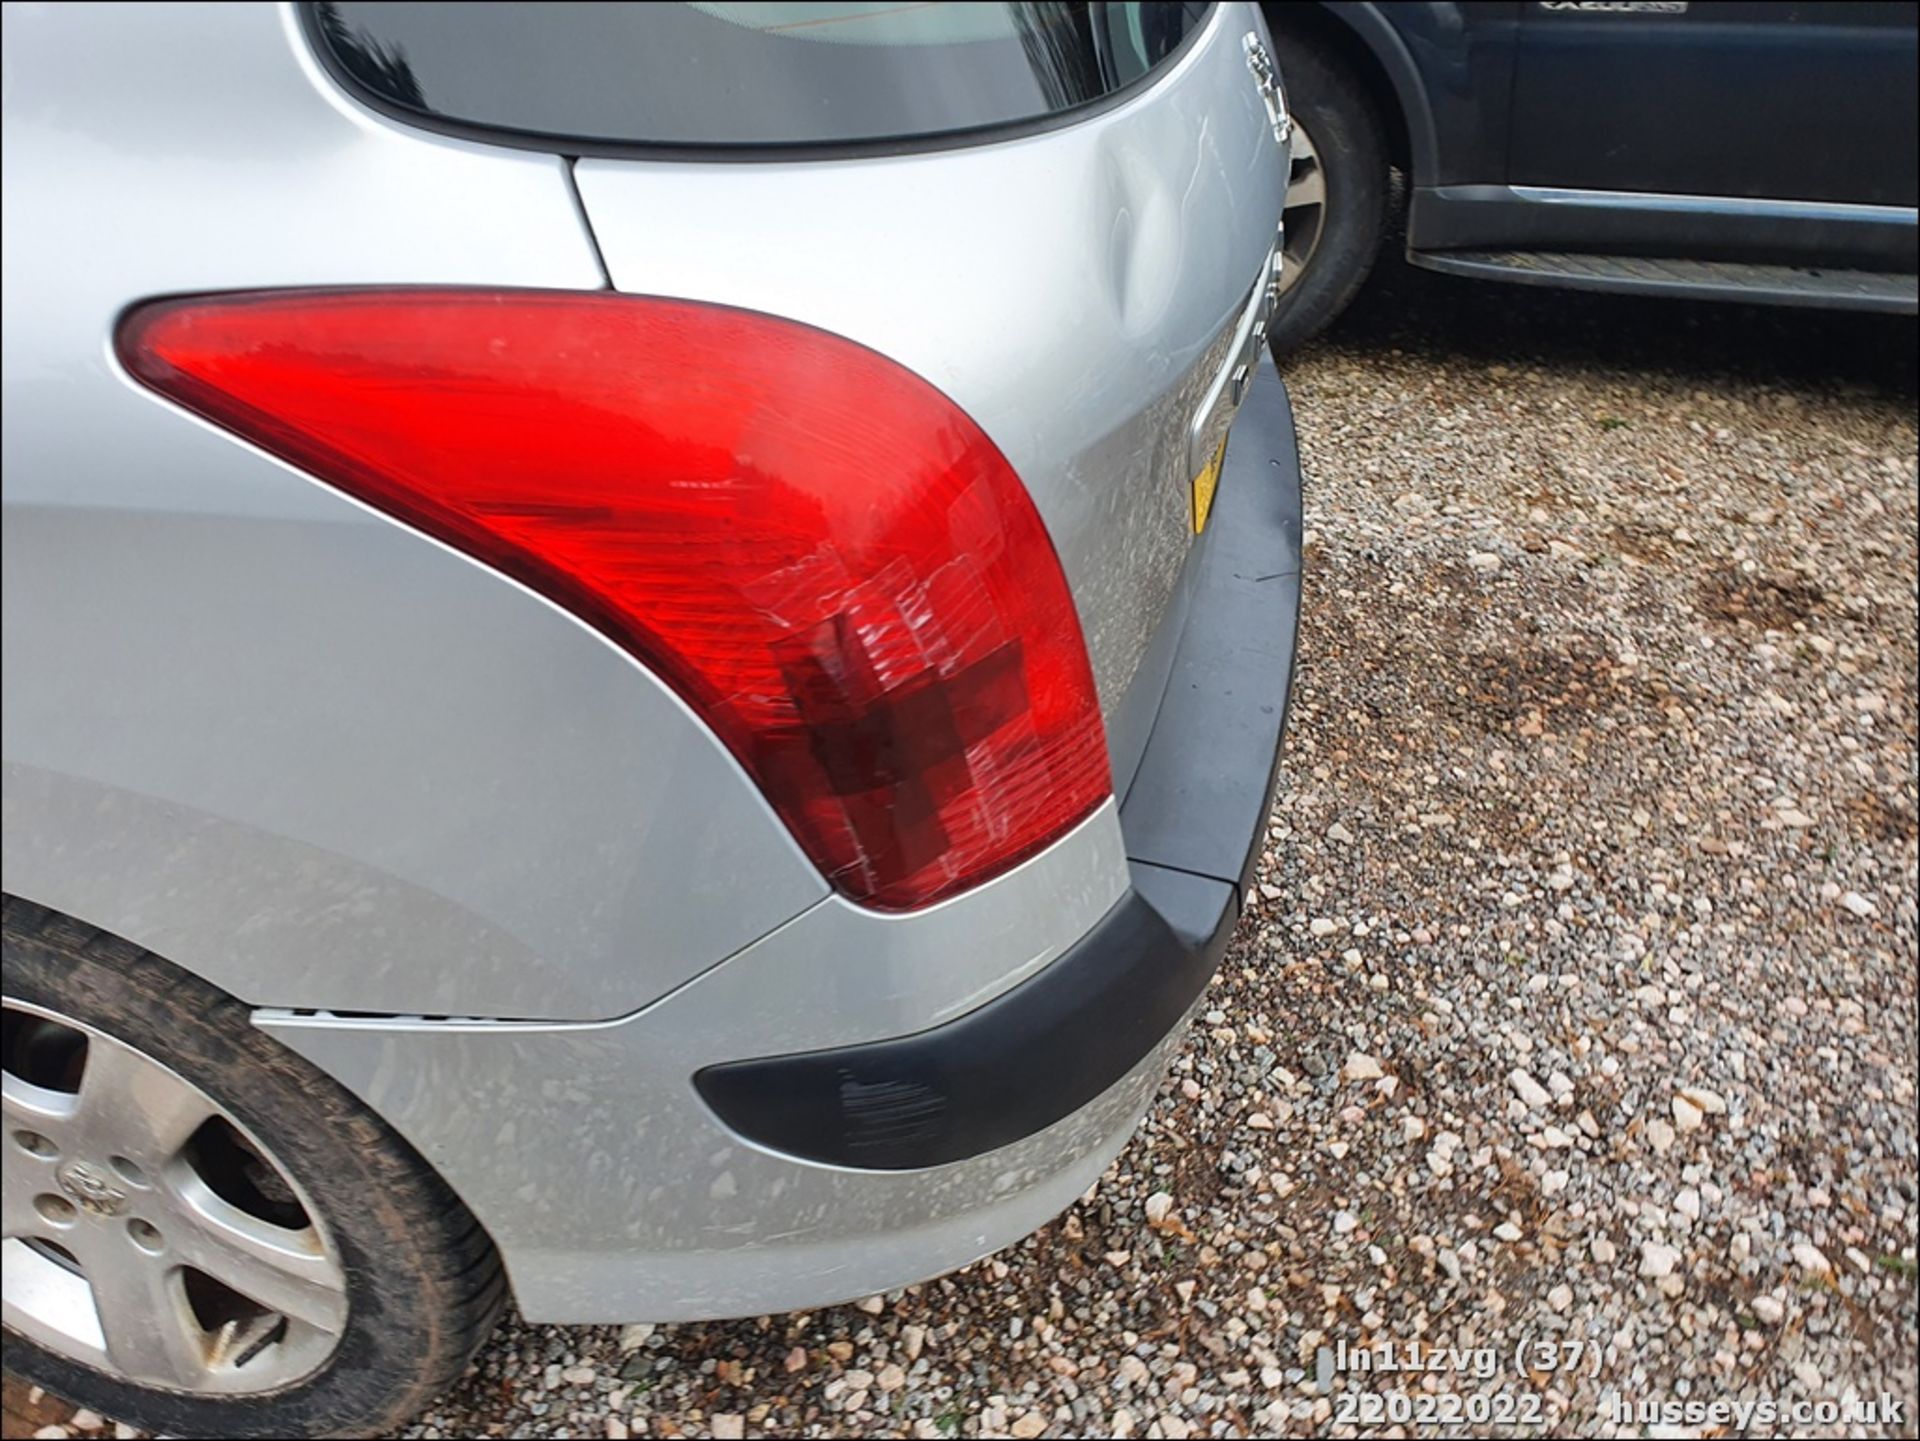 11/11 PEUGEOT 308 S SW HDI 92 - 1560cc 5dr Estate (Silver, 115k) - Image 37 of 46